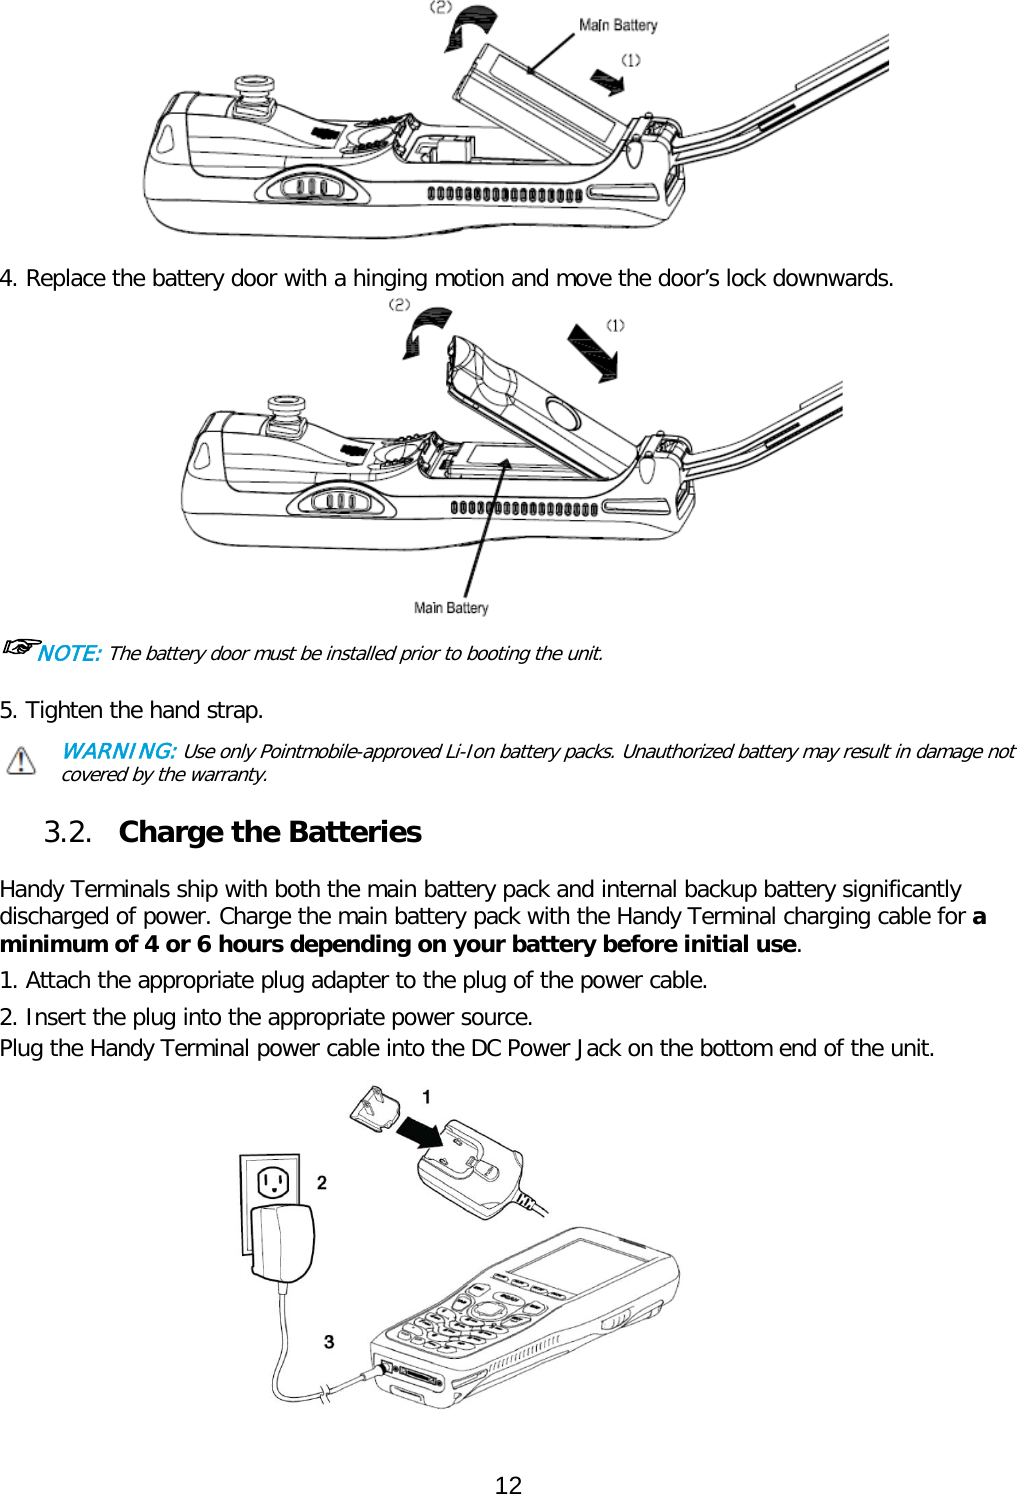  4. Replace the battery door with a hinging motion and move the door’s lock downwards.  ☞NOTE: The battery door must be installed prior to booting the unit. 5. Tighten the hand strap. WARNING: Use only Pointmobile-approved Li-Ion battery packs. Unauthorized battery may result in damage not covered by the warranty.  3.2. Charge the Batteries  Handy Terminals ship with both the main battery pack and internal backup battery significantly discharged of power. Charge the main battery pack with the Handy Terminal charging cable for a minimum of 4 or 6 hours depending on your battery before initial use.  1. Attach the appropriate plug adapter to the plug of the power cable.  2. Insert the plug into the appropriate power source. Plug the Handy Terminal power cable into the DC Power Jack on the bottom end of the unit.             12  